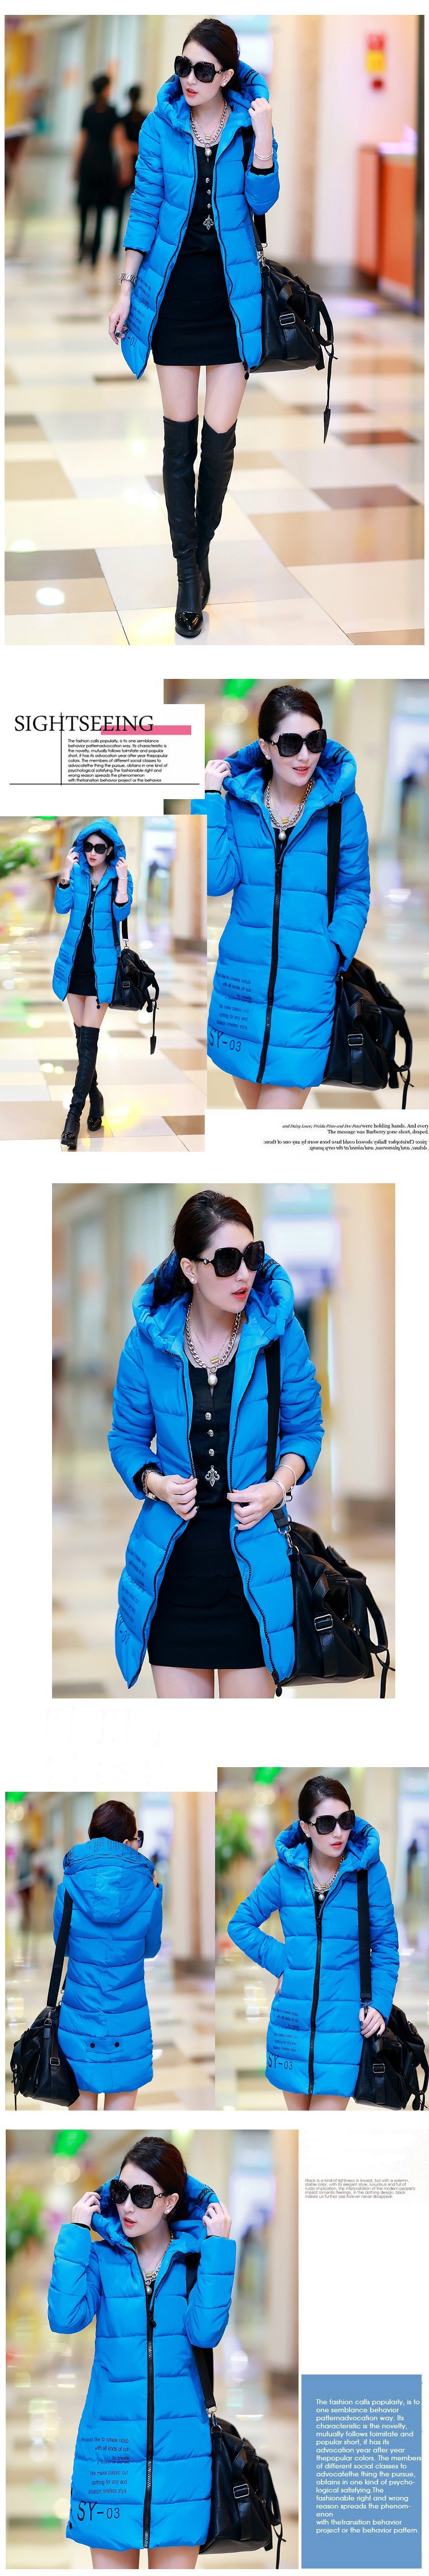 2015 NEW Fashion Winter Coat Women Casual Letter Print Down Jackets Large Size Slim Hooded Outerwear Coats Woman\'S Coat 4XL (8)